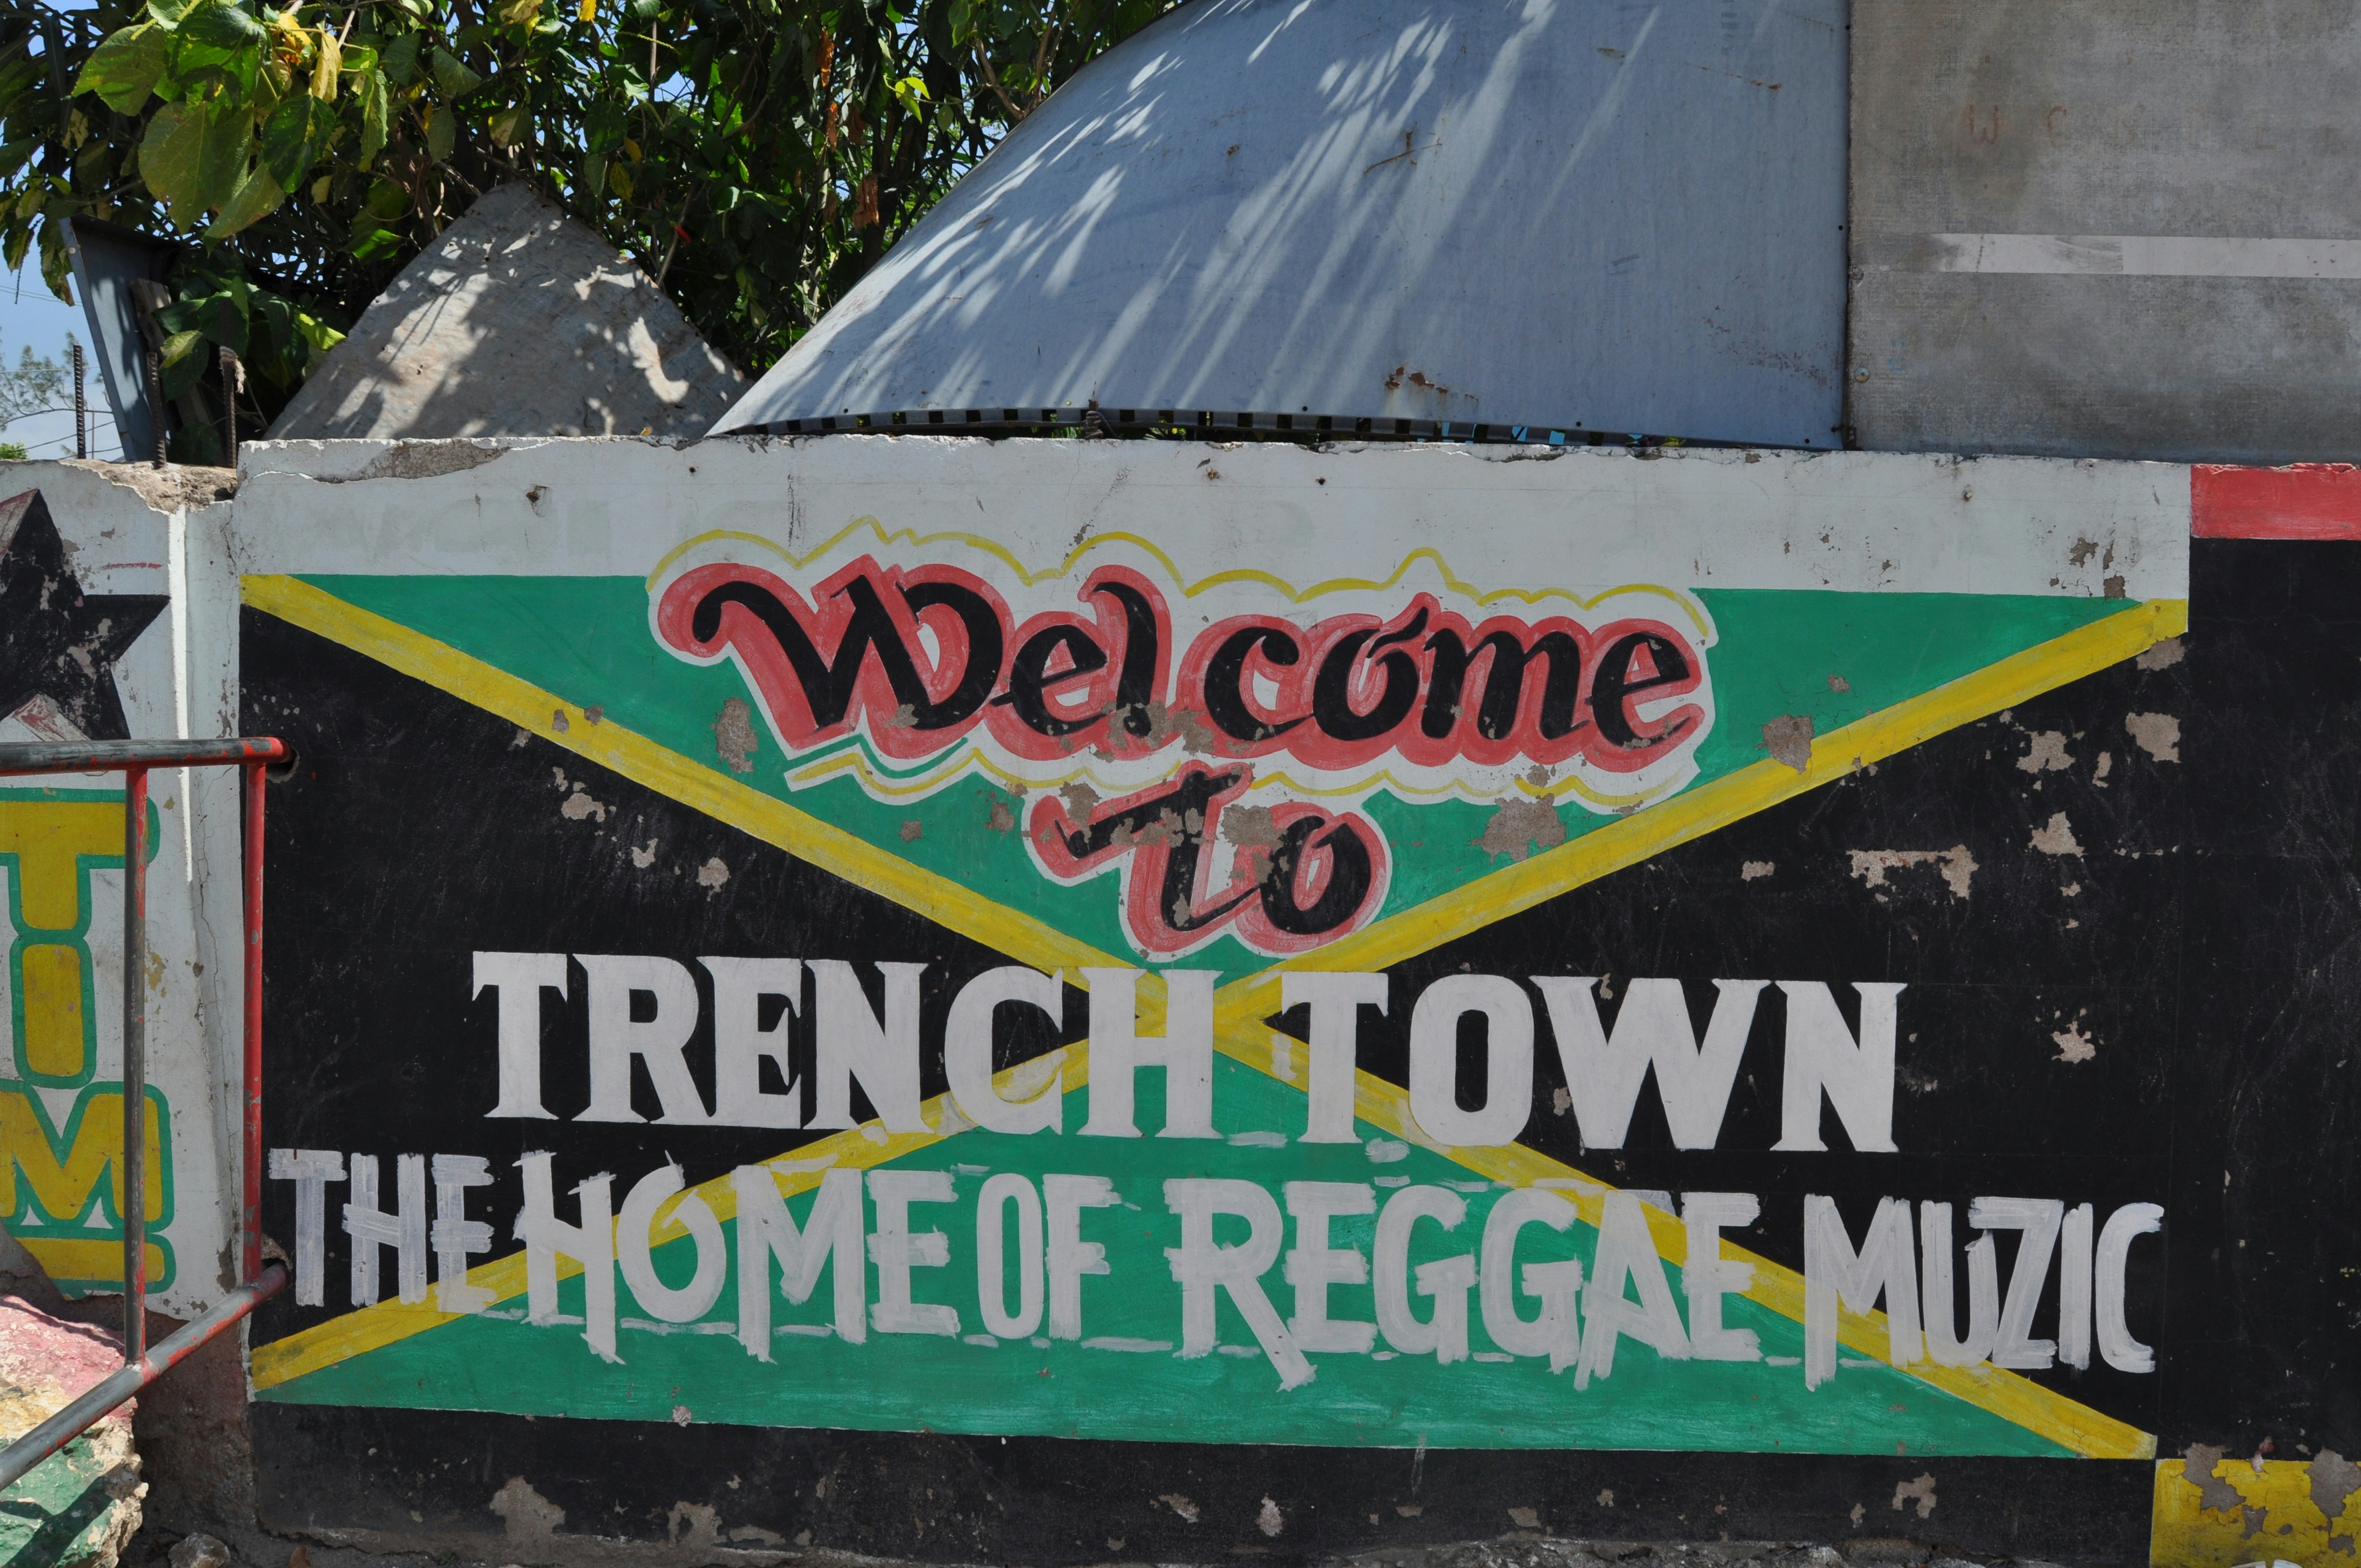 Concrete wall with the words "Trench Town The Home of Reggae Muzic" painted on top of a painting of the Jamaica green, black and gold flag.